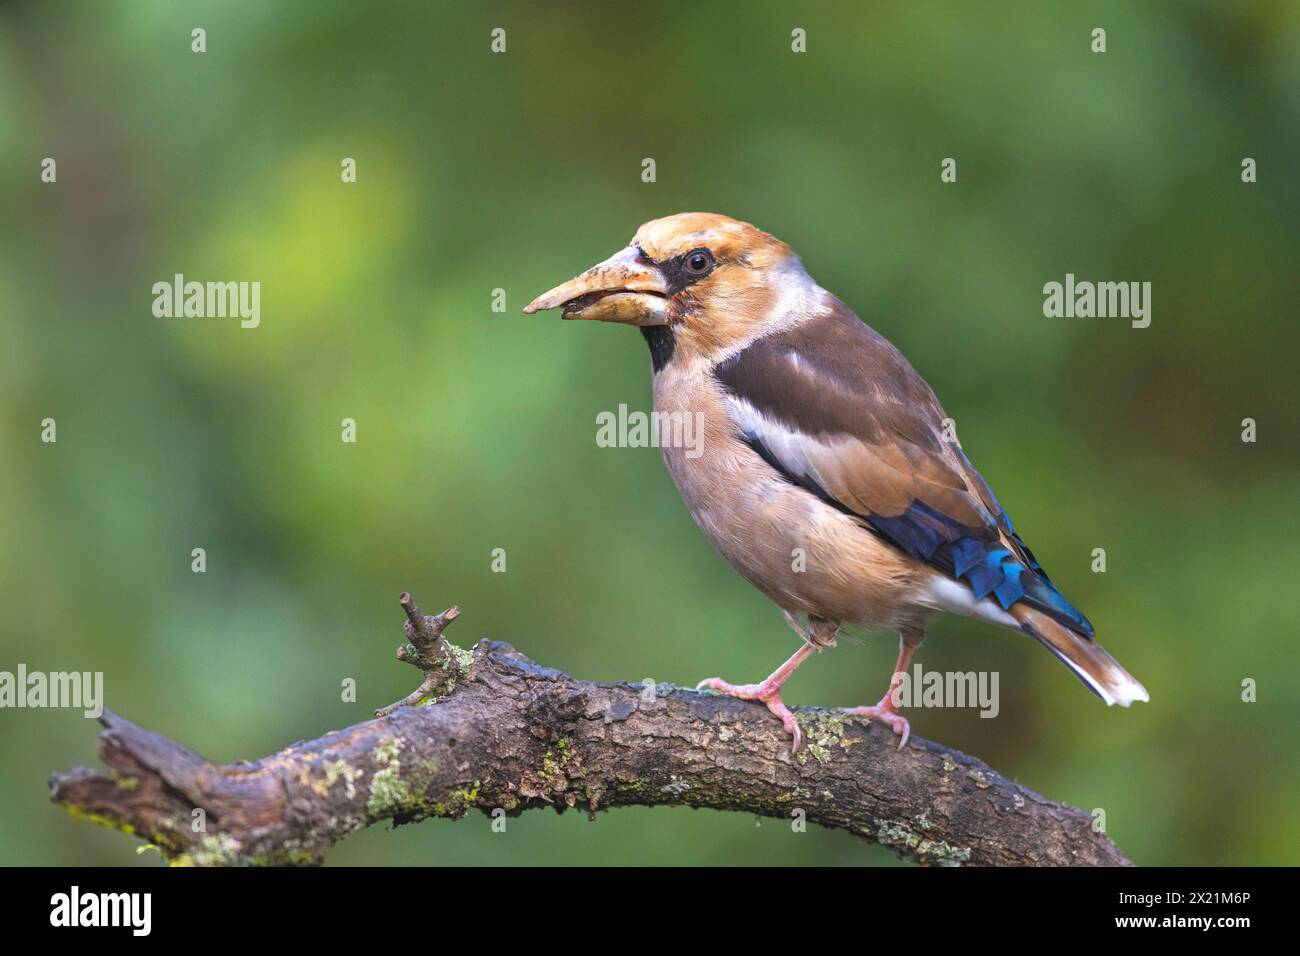 hawfinch (Coccothraustes coccothraustes), in eclipse plumage, sitting on a branch, elongated upper beak, Spain, Andalusia, Adamuz Stock Photo